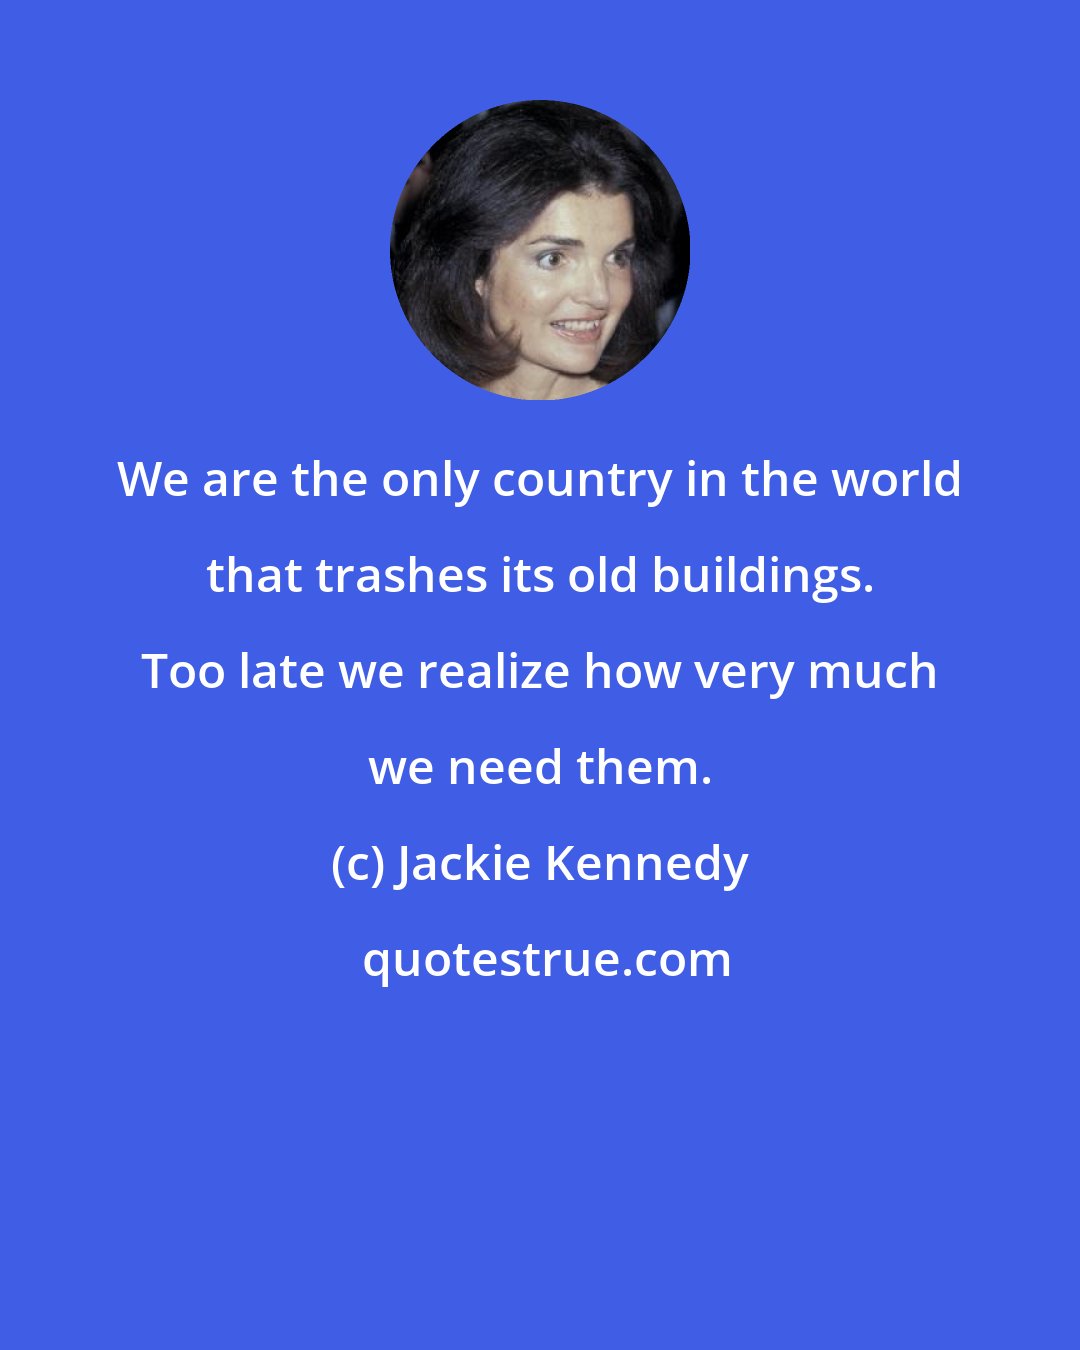 Jackie Kennedy: We are the only country in the world that trashes its old buildings. Too late we realize how very much we need them.